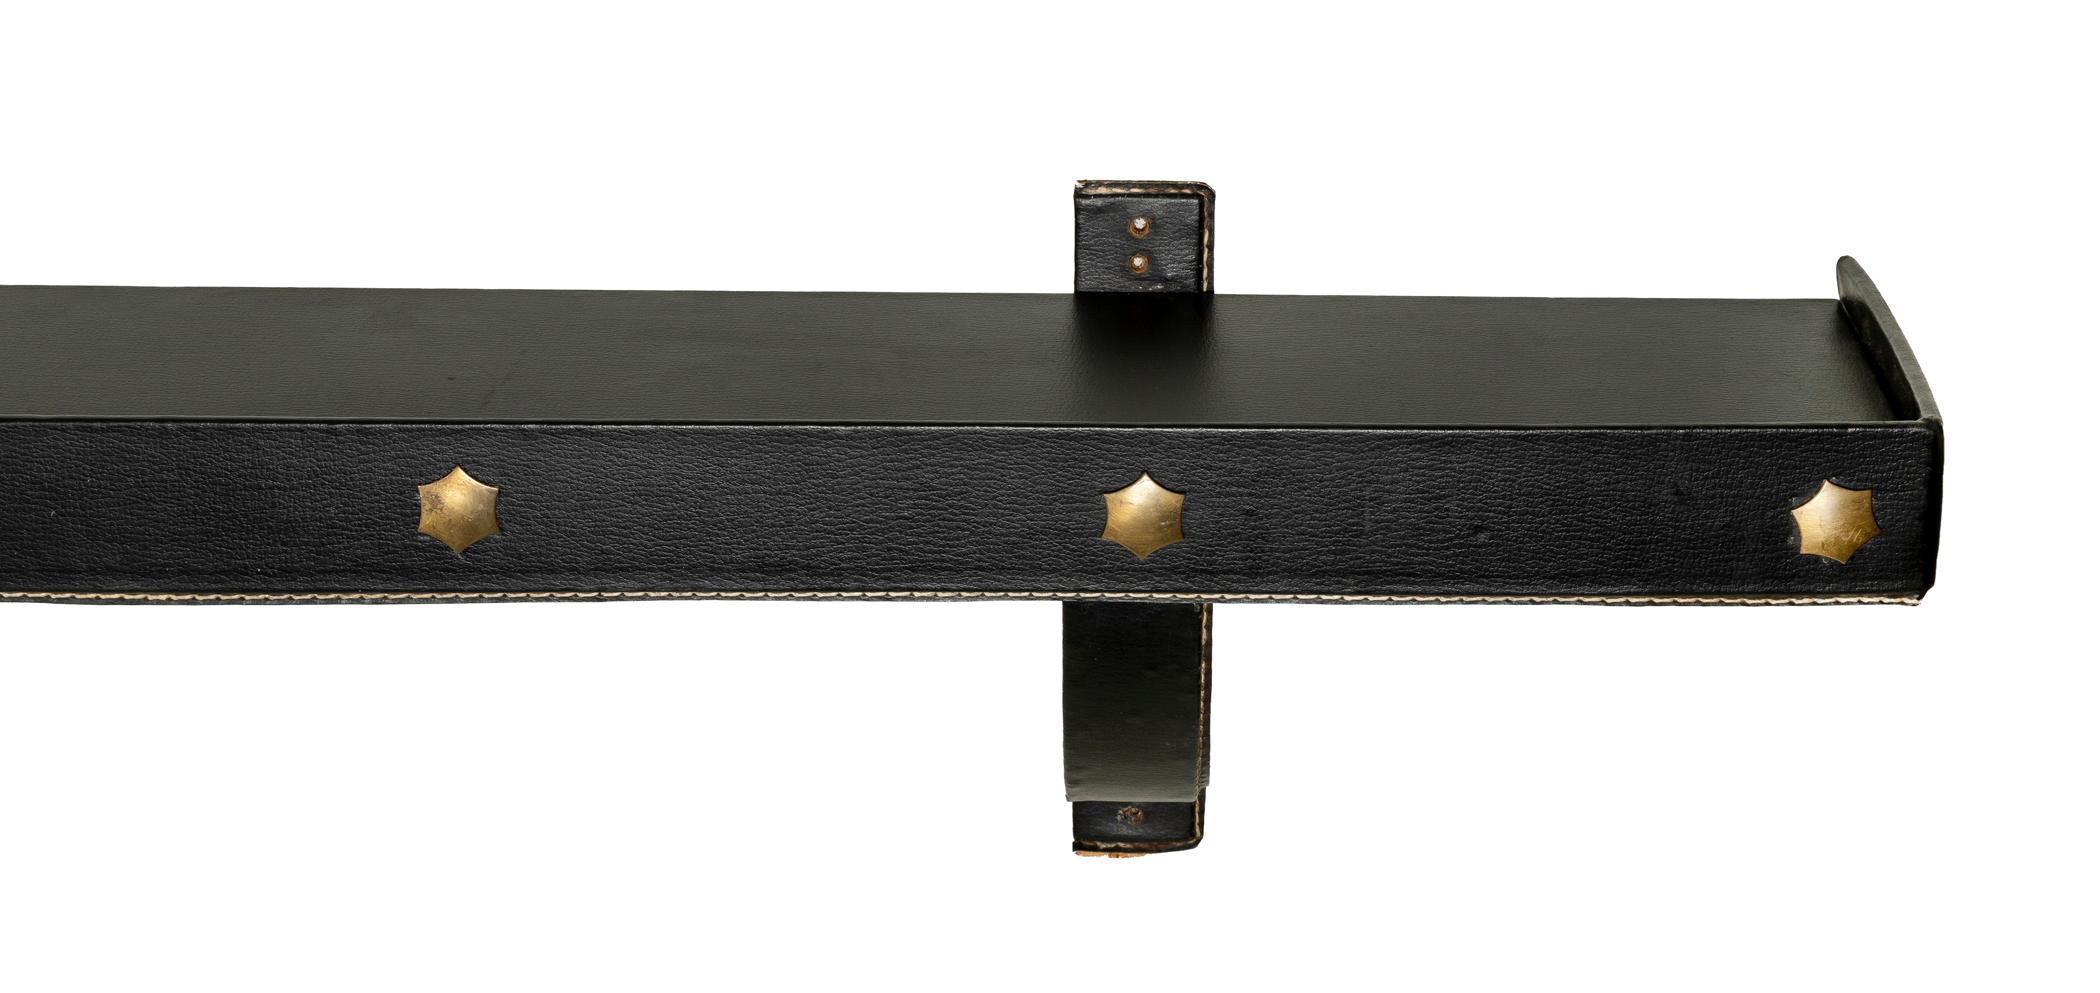 A fantastic leather clad wall shelf with brass accents.